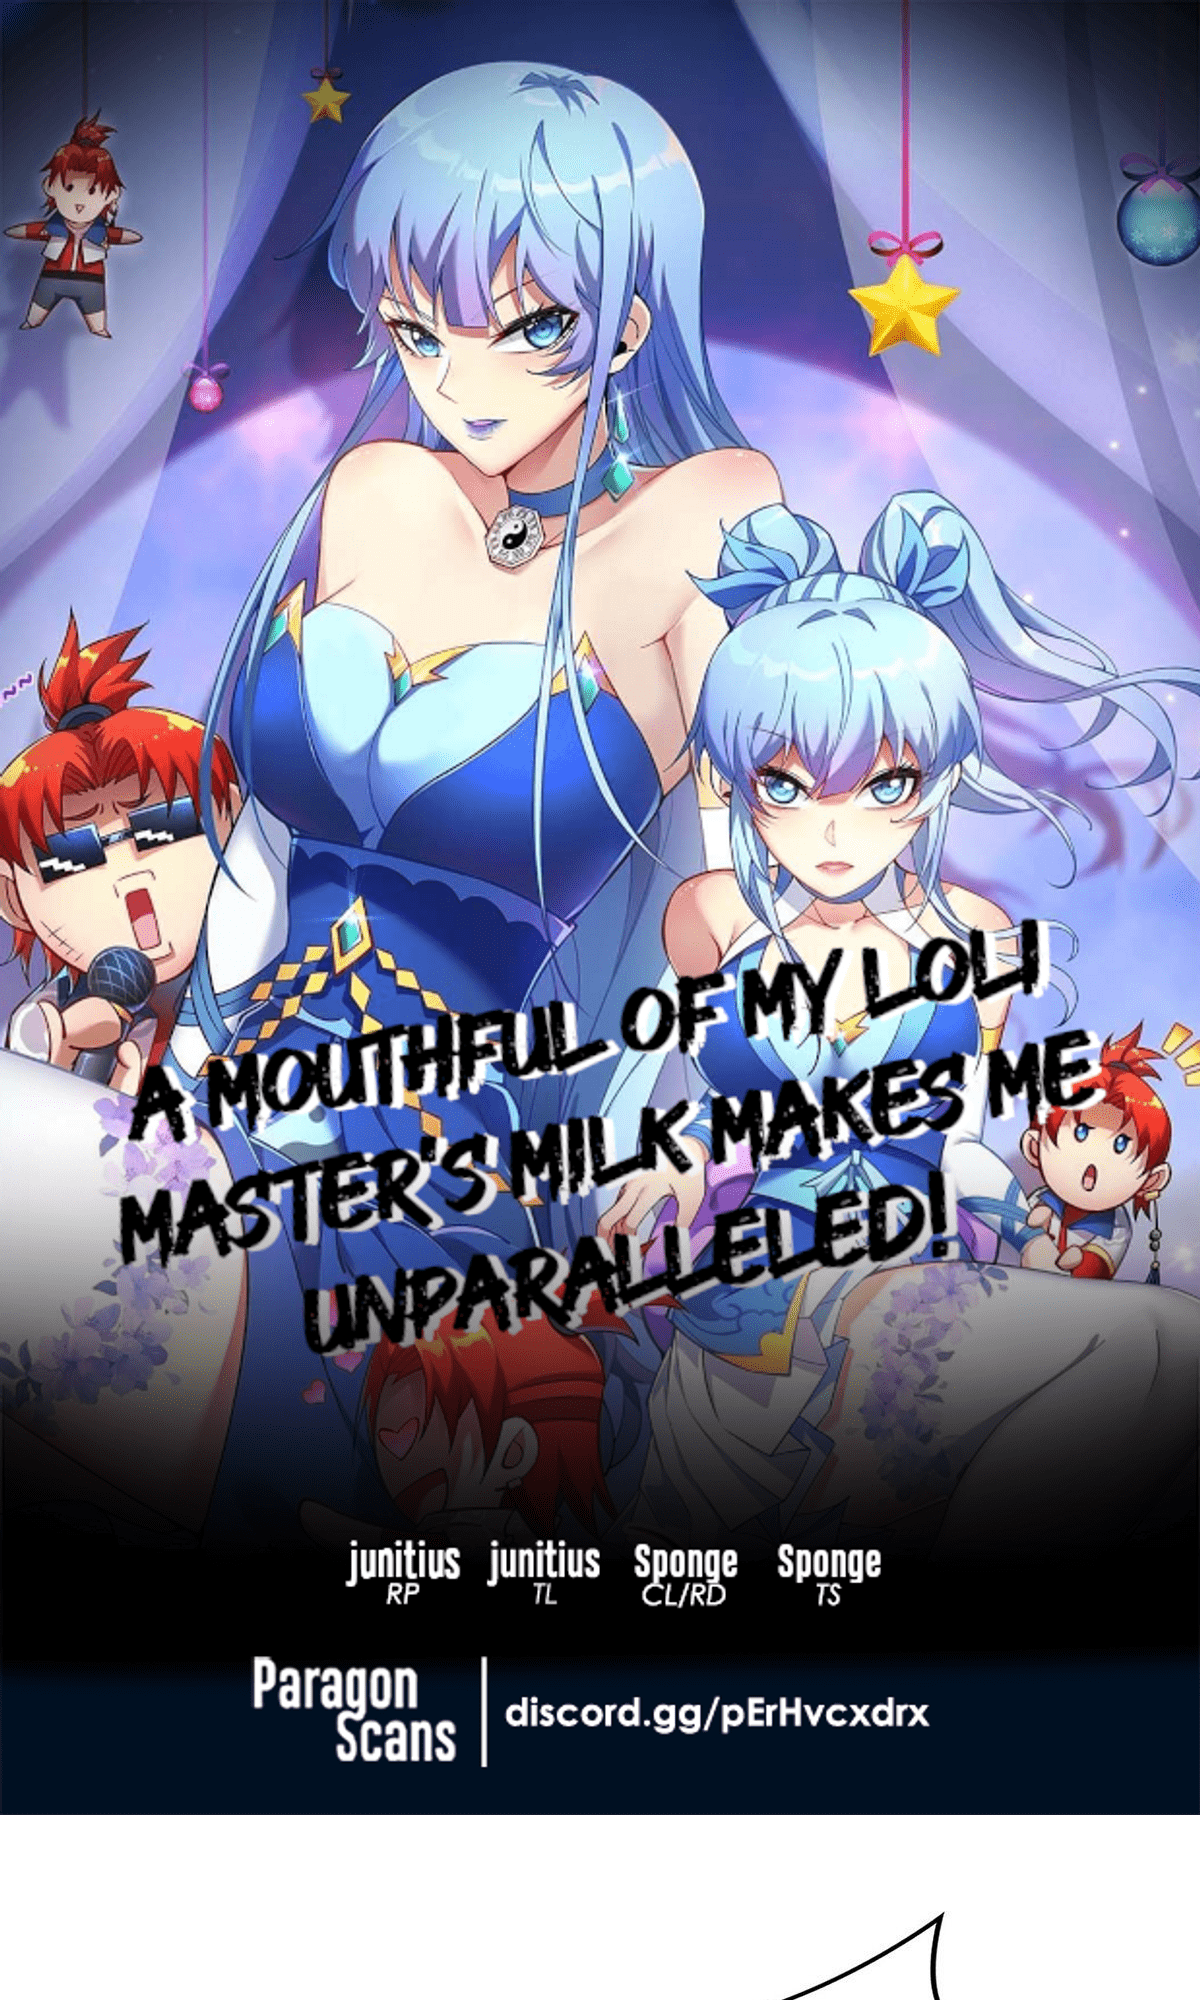 A Mouthful Of My Loli Master's Milk Makes Me Unparalleled - Page 1